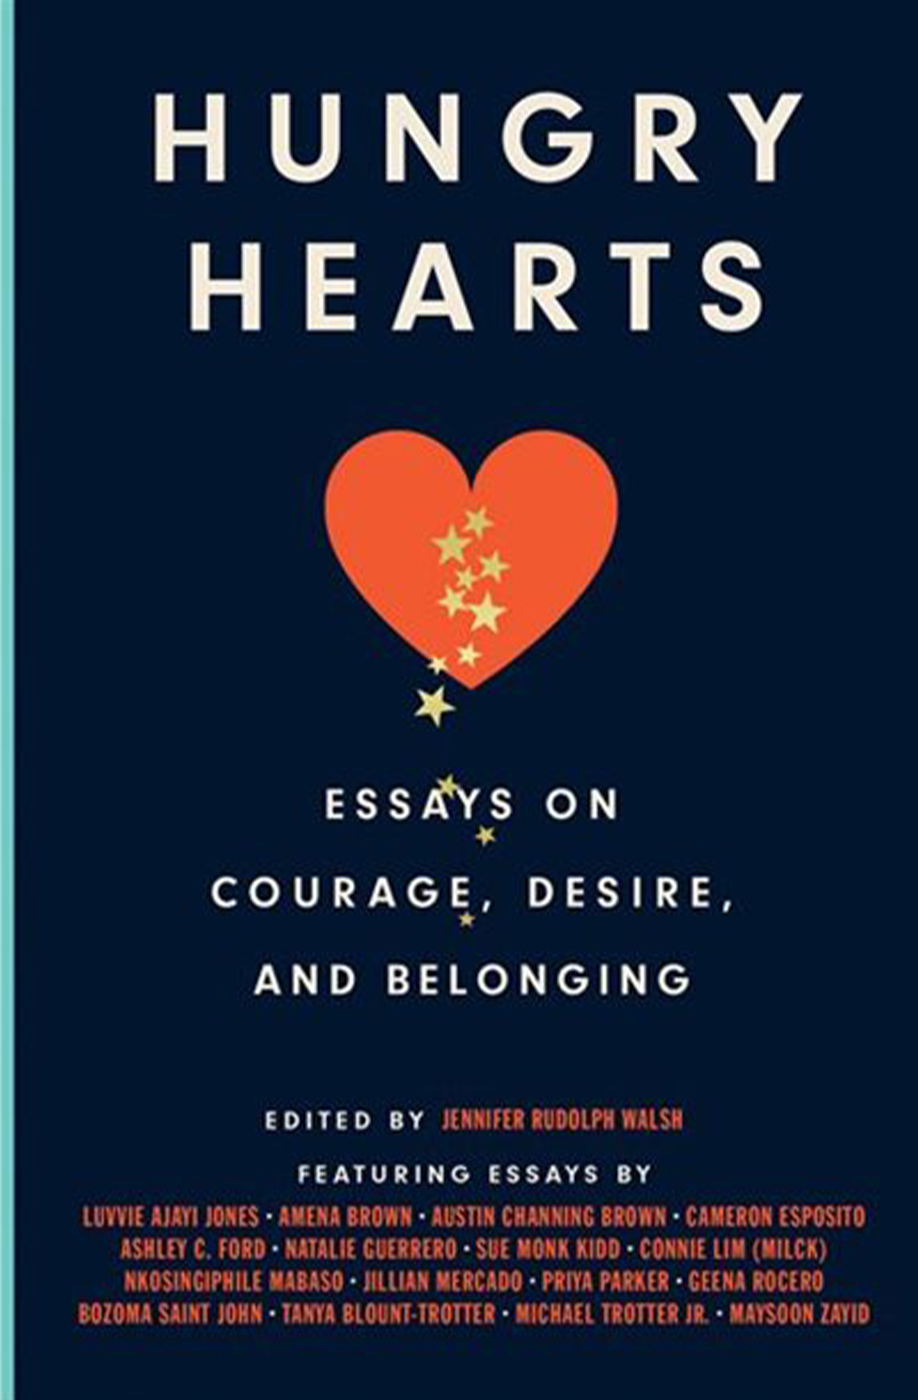 Hungry Hearts: Essays on Courage, Desire and Belonging by Jennifer Rudolph Walsh